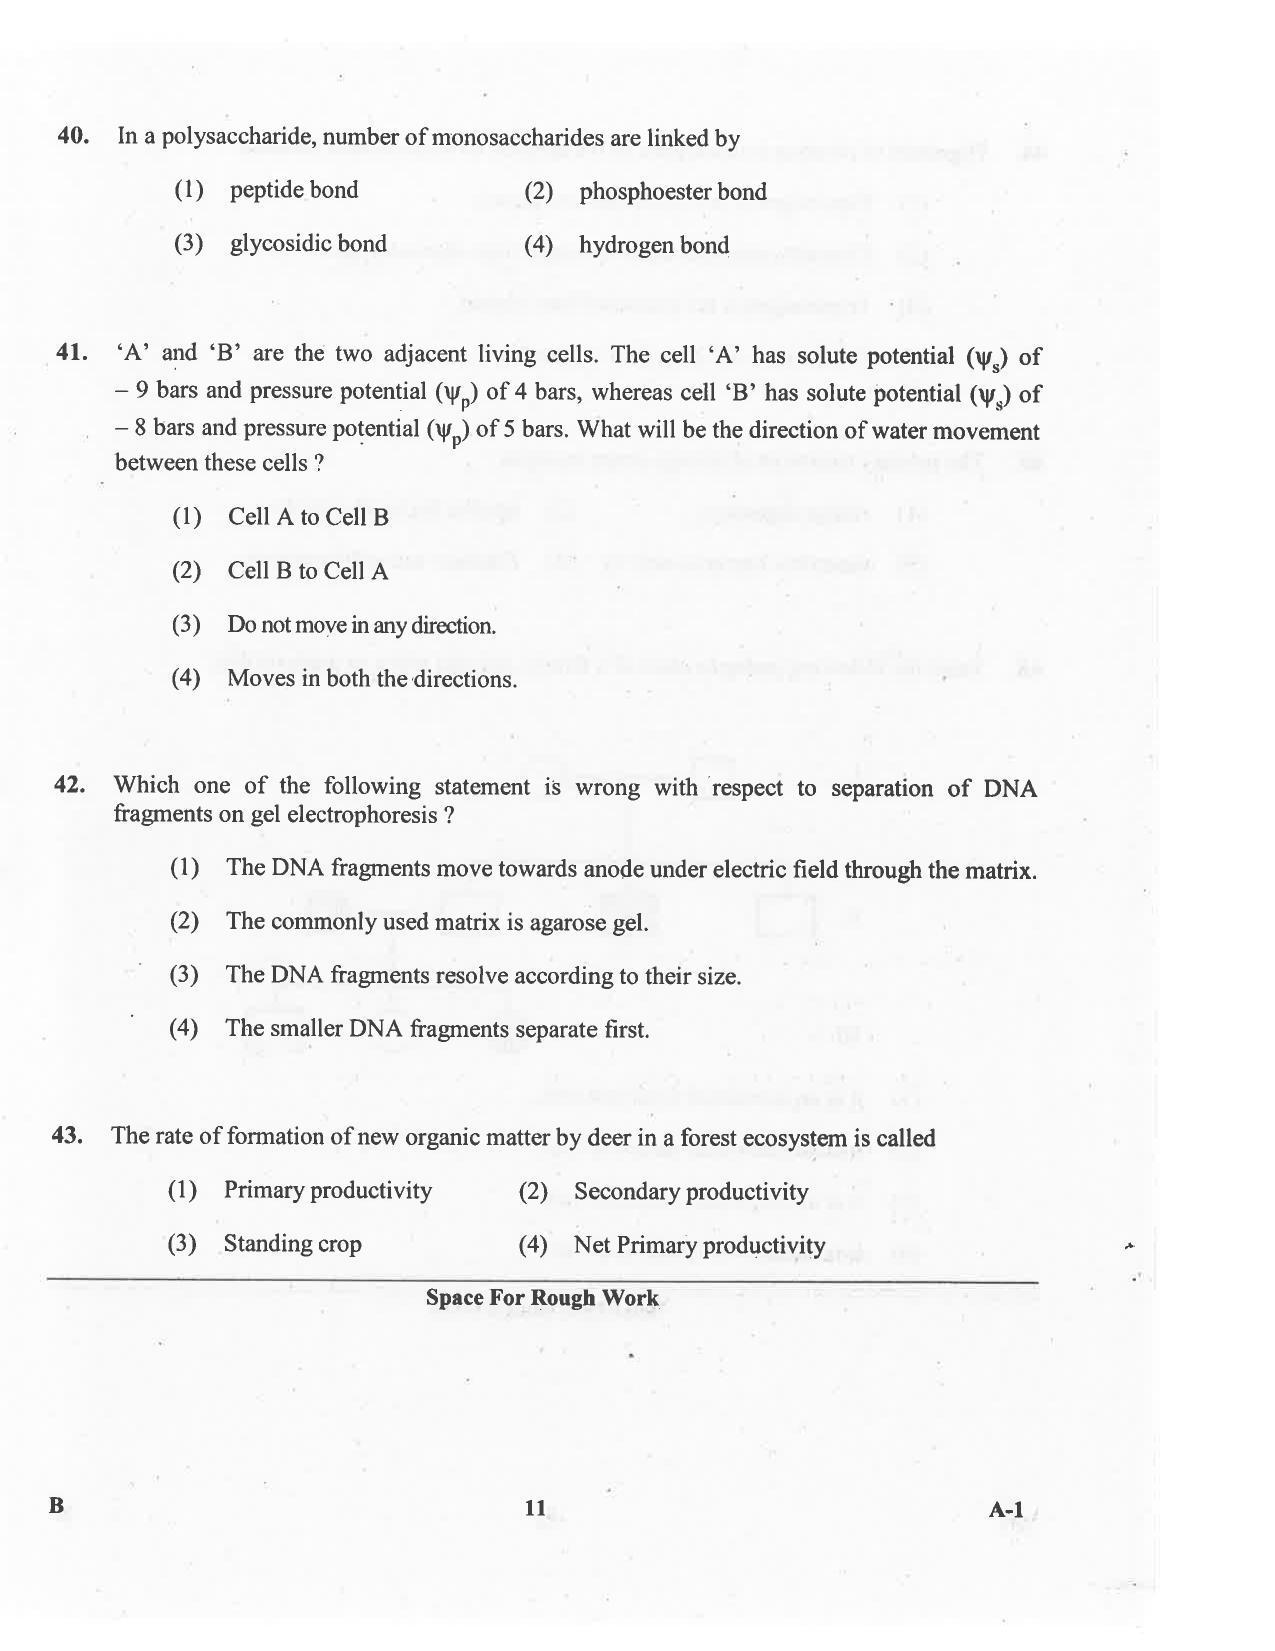 KCET Biology 2016 Question Papers - Page 11